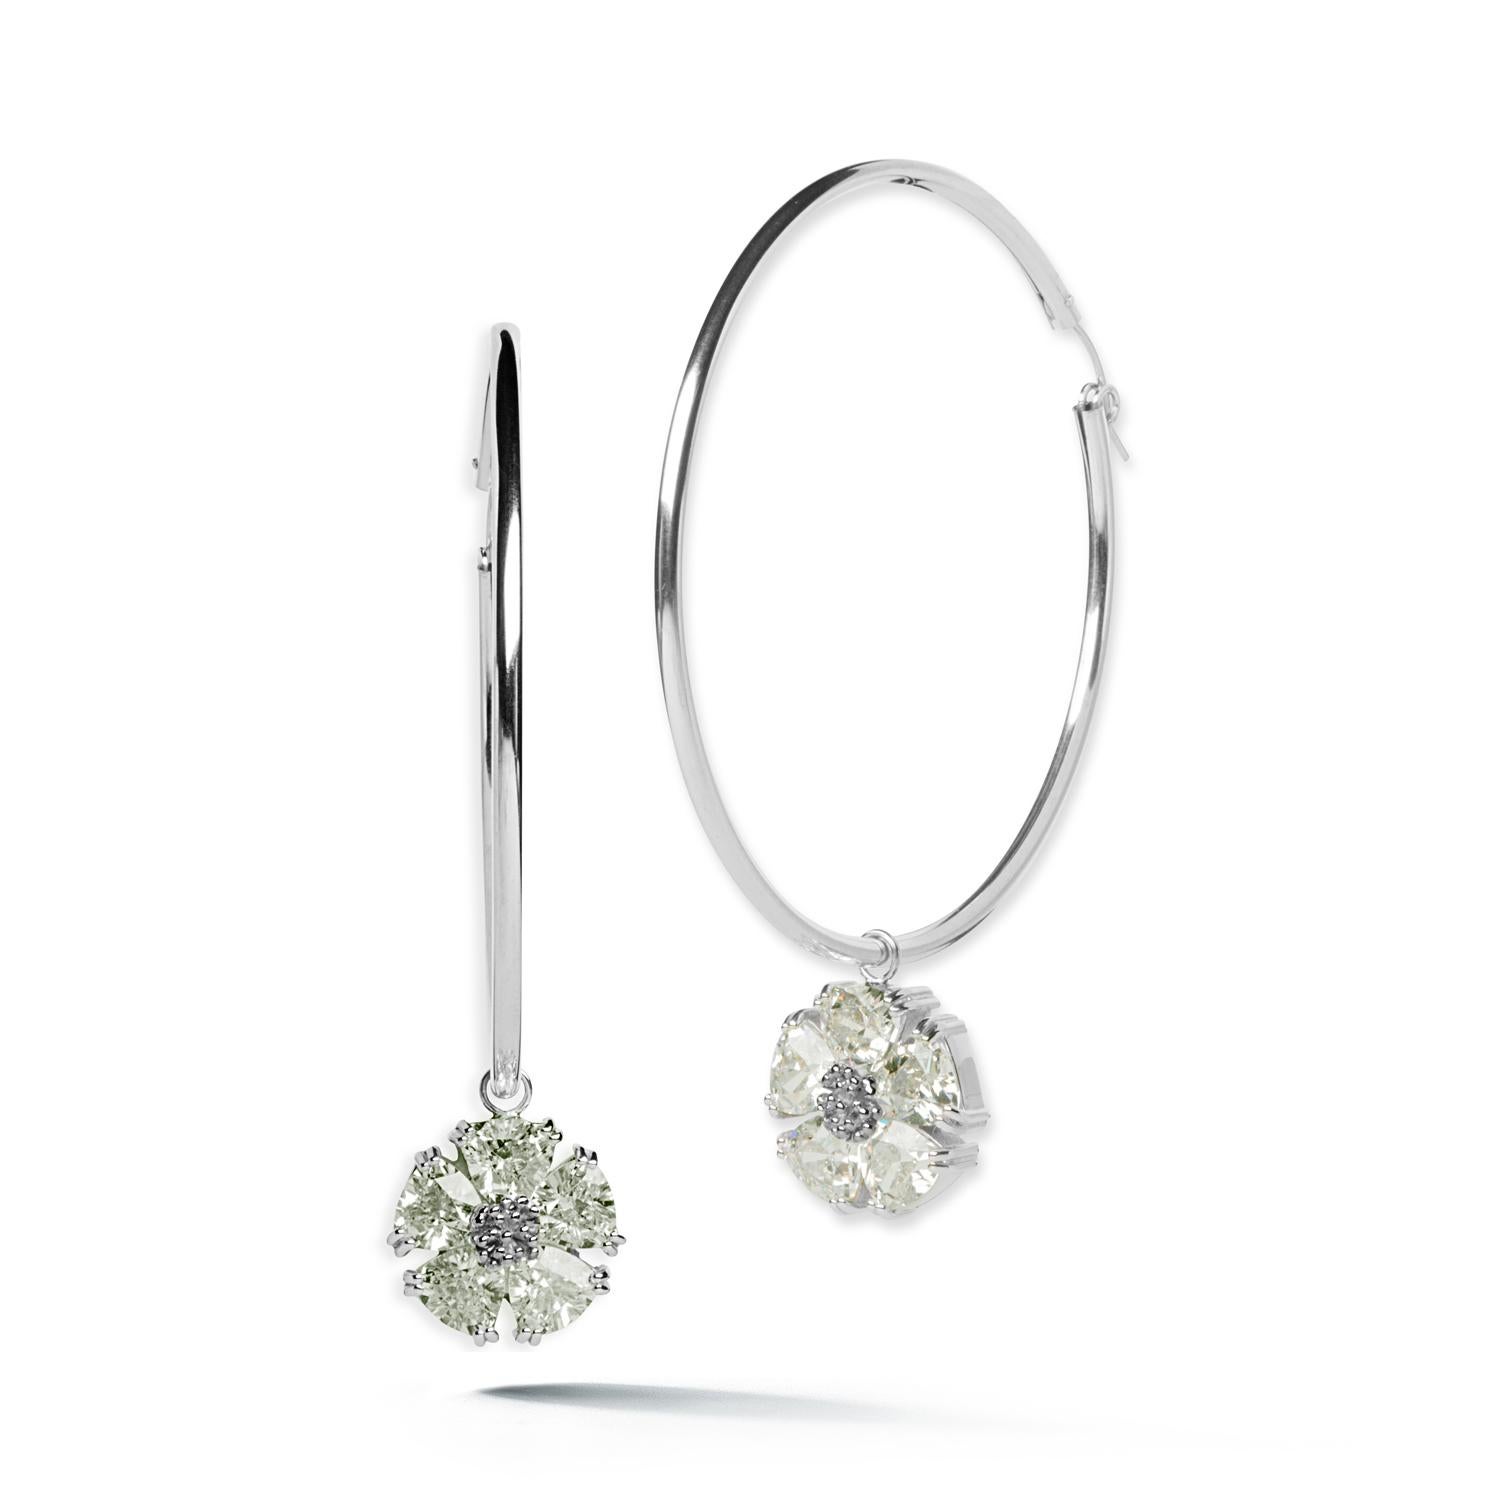 Designed in NYC

.925 Sterling Silver 10 x 7 mm Olive Peridot Blossom Stone Dangle Hoops. Big dangle hoops take on an edgy elegance with beautiful blossom with stones dangling. Blossom stone dangle hoops: 

	Sterling silver 
	High-polish